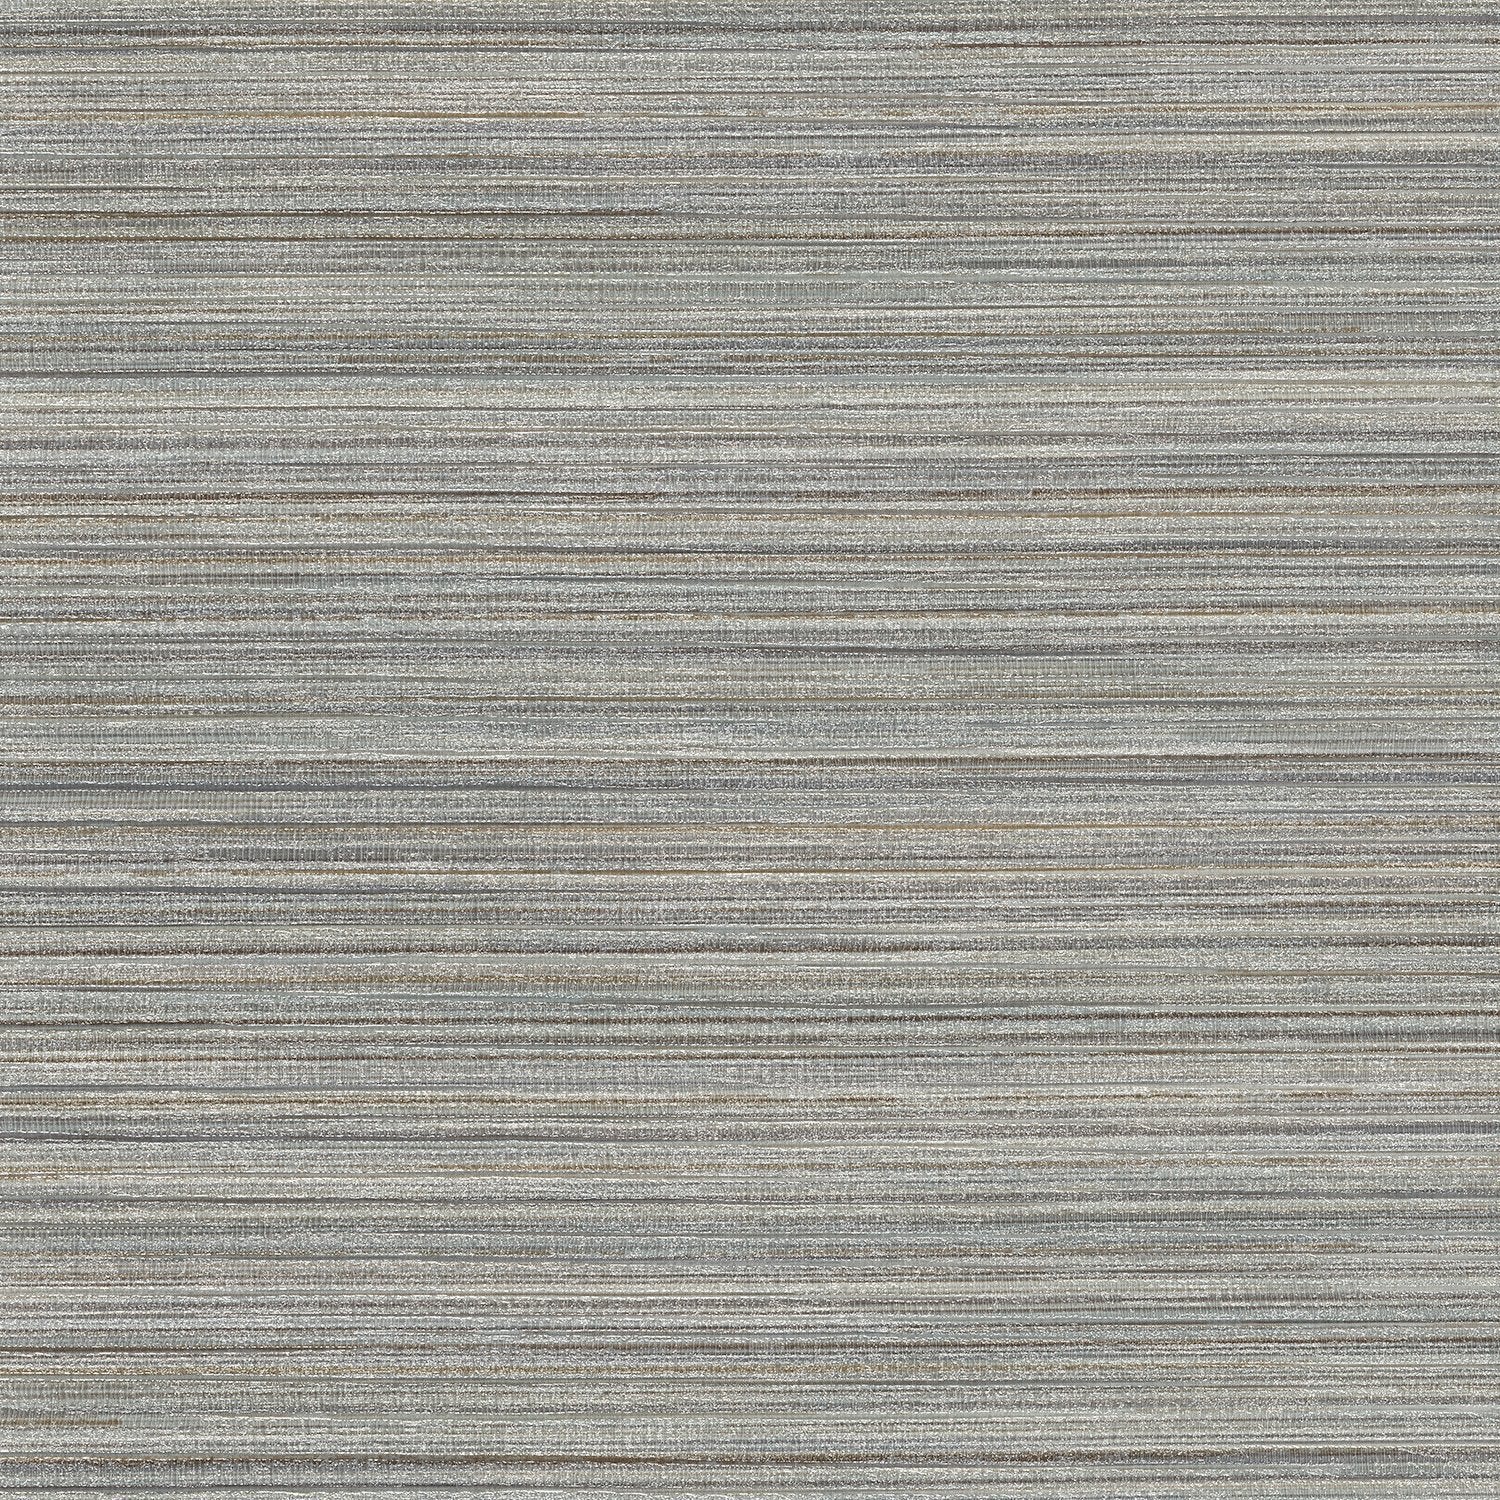 Gallery Silk - Y47738 Paynes Grey - Wallcovering - Vycon - Kube Contract